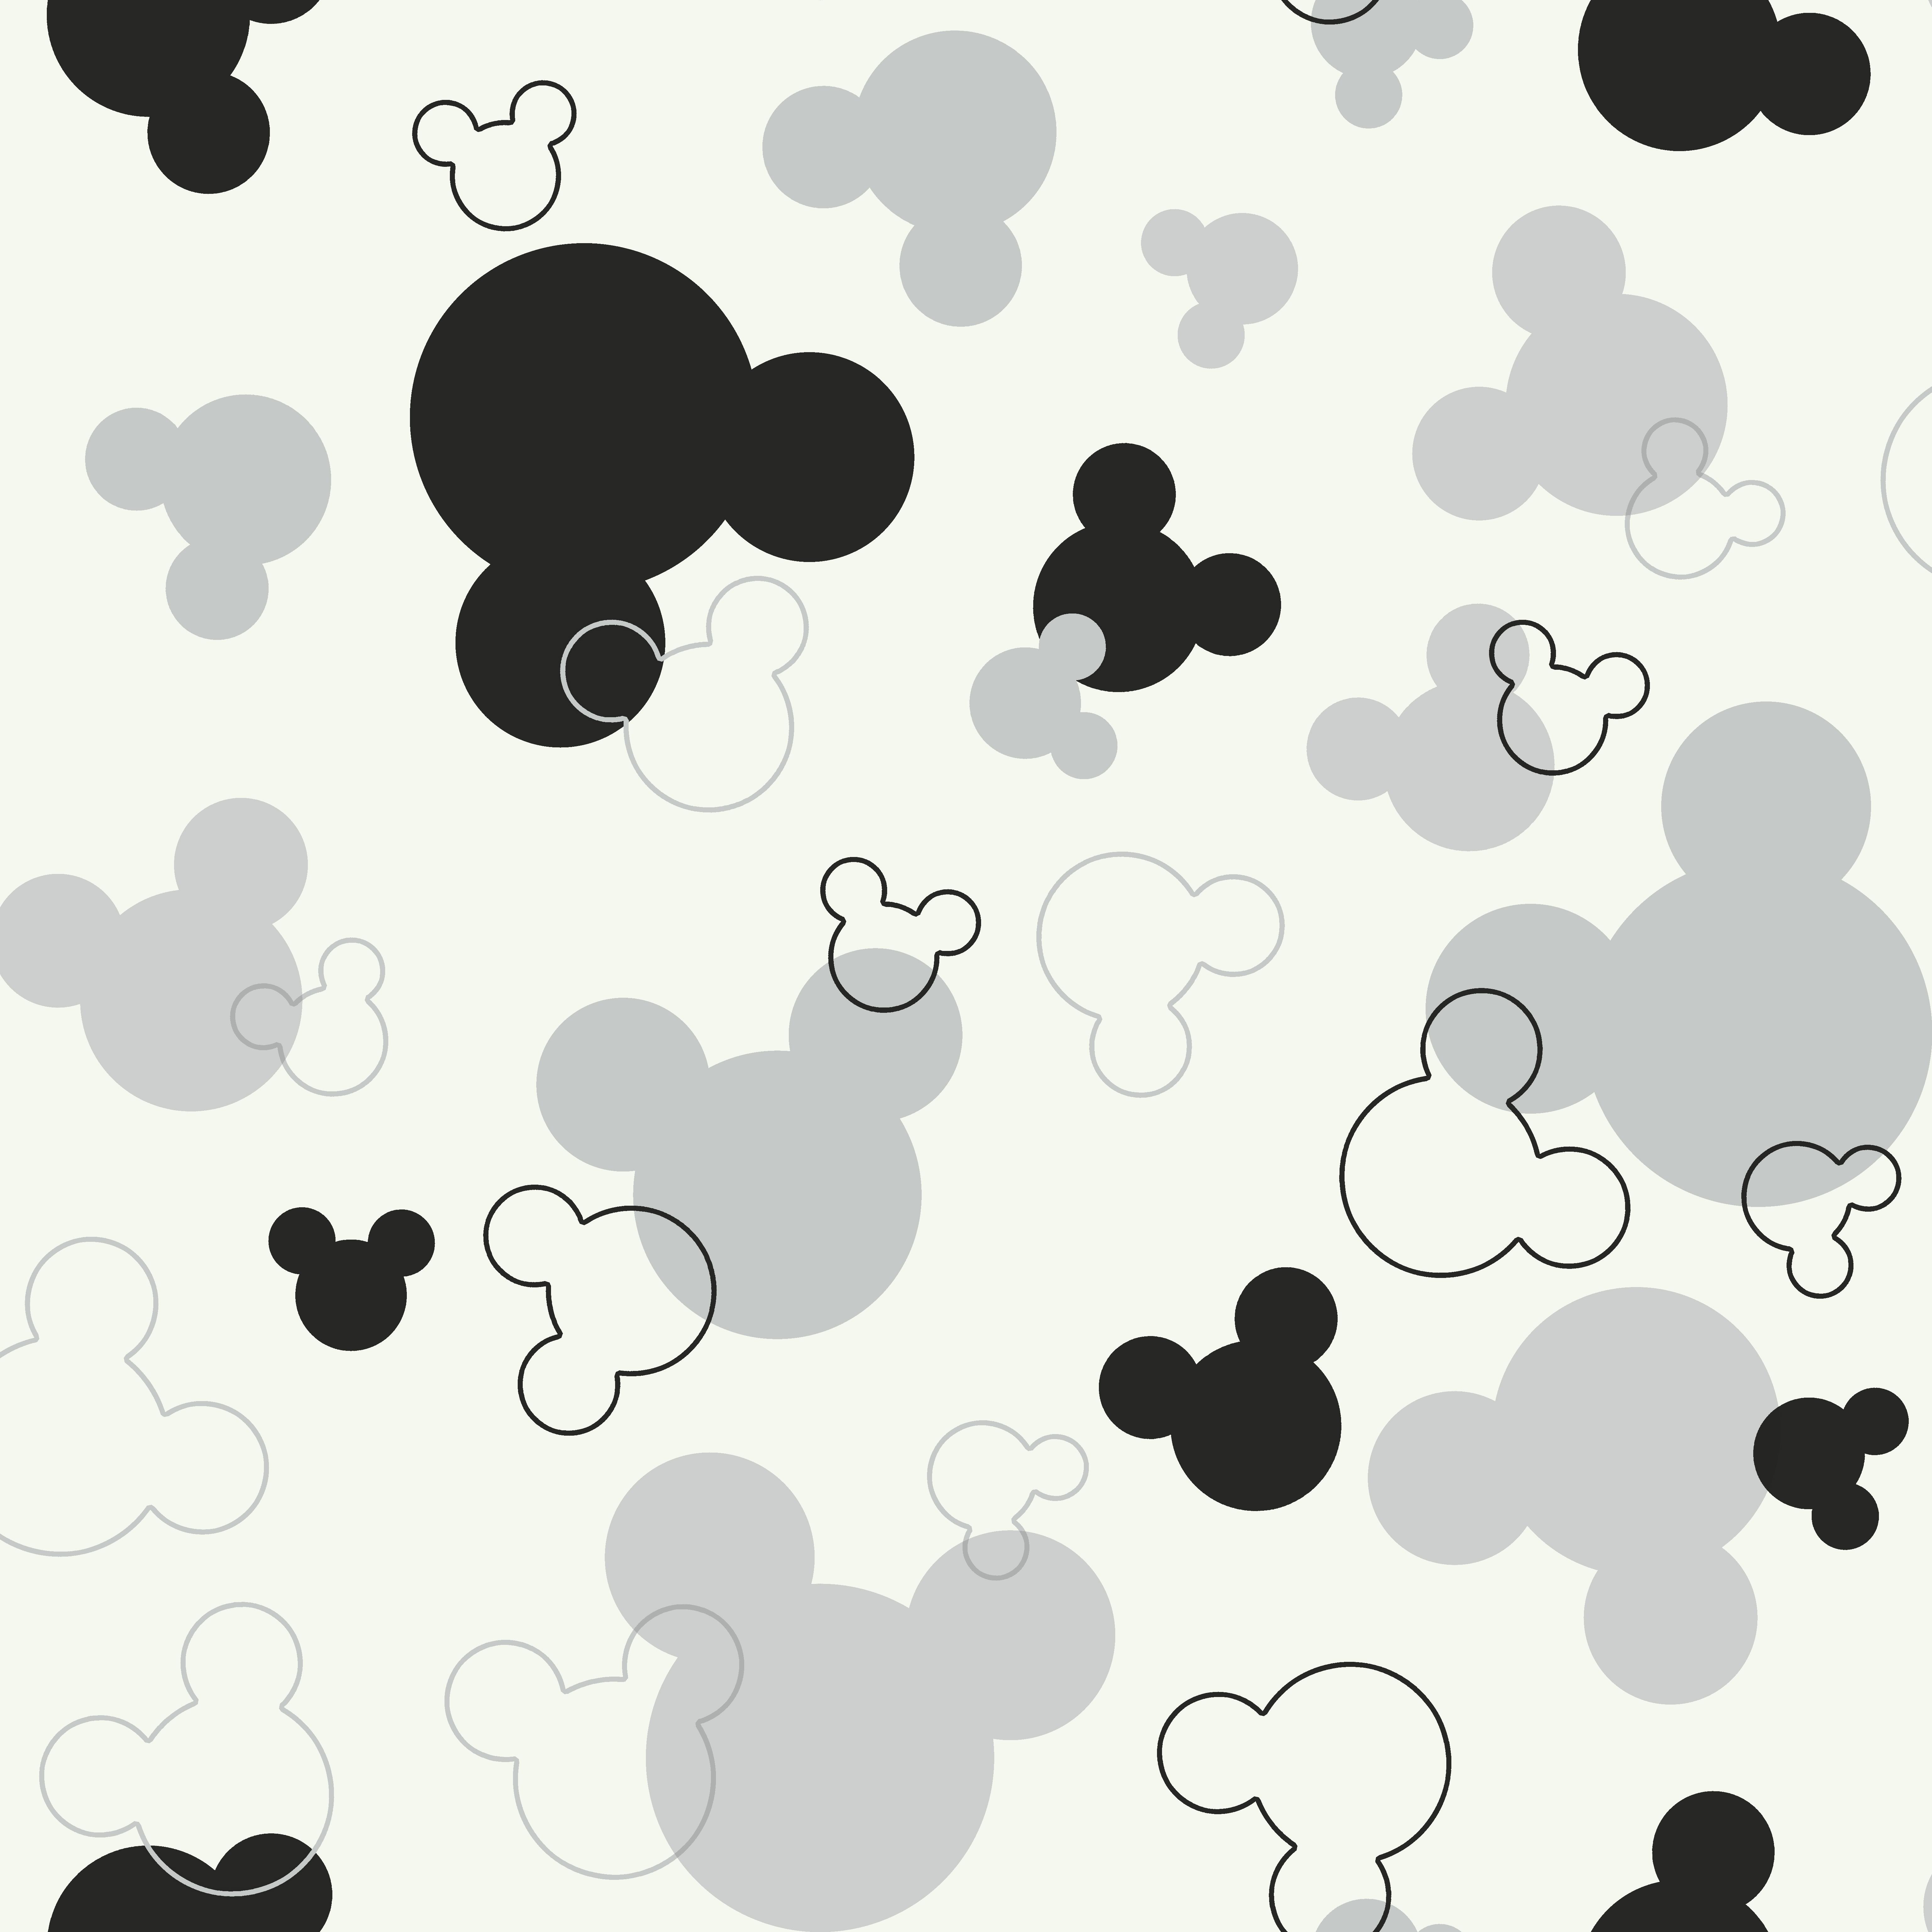 Black and white mickey mouse Wallpapers Download